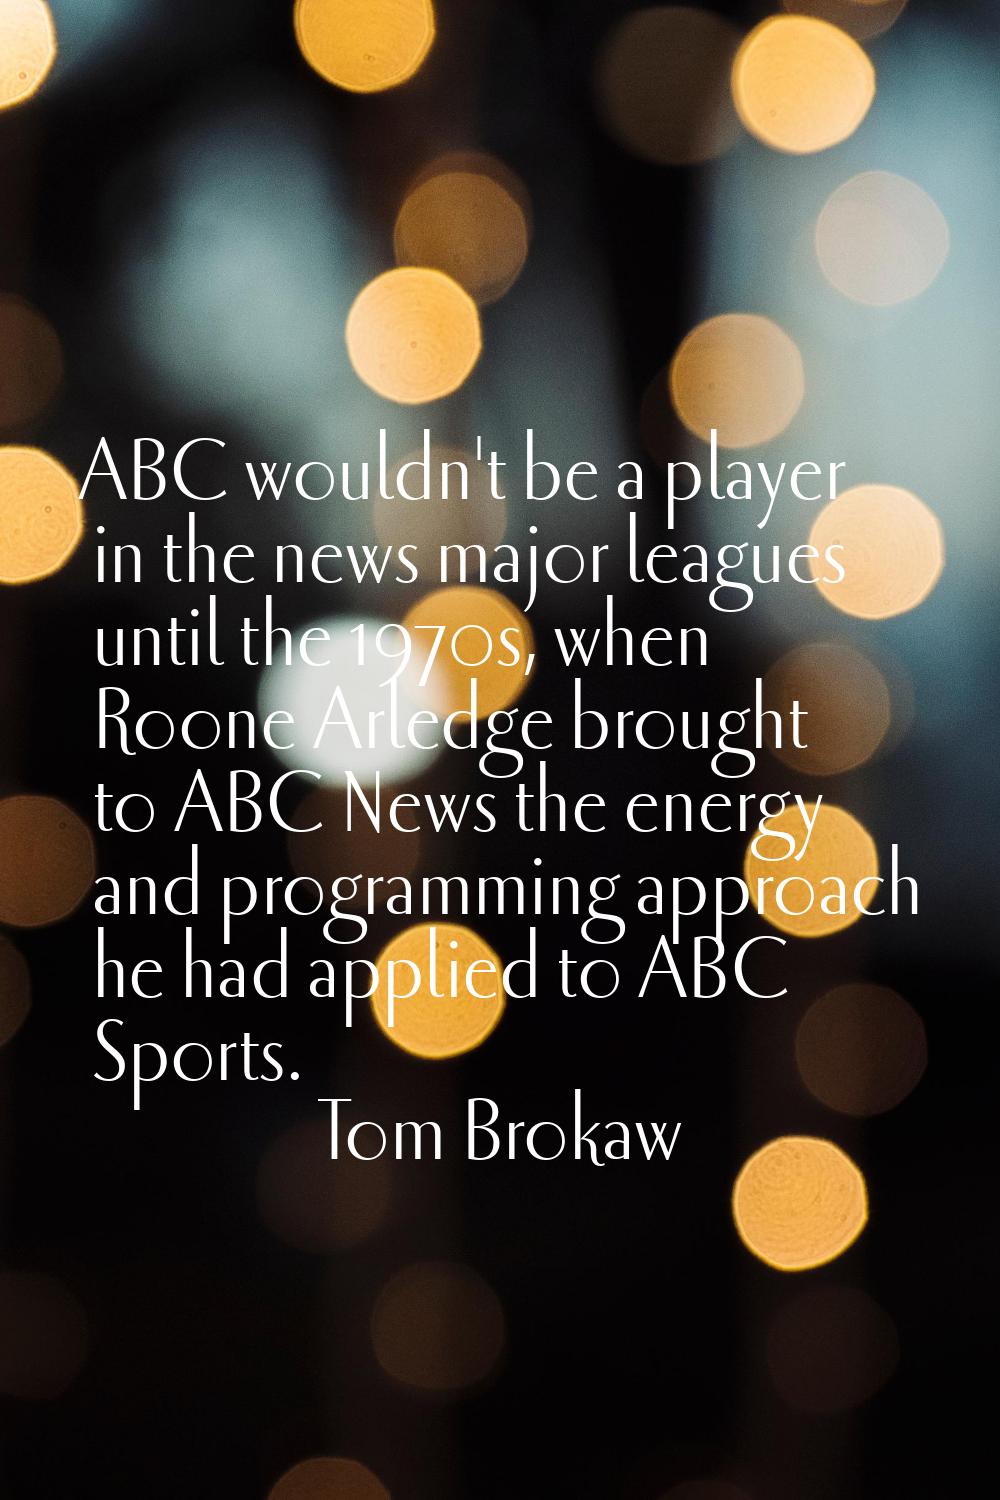 ABC wouldn't be a player in the news major leagues until the 1970s, when Roone Arledge brought to A